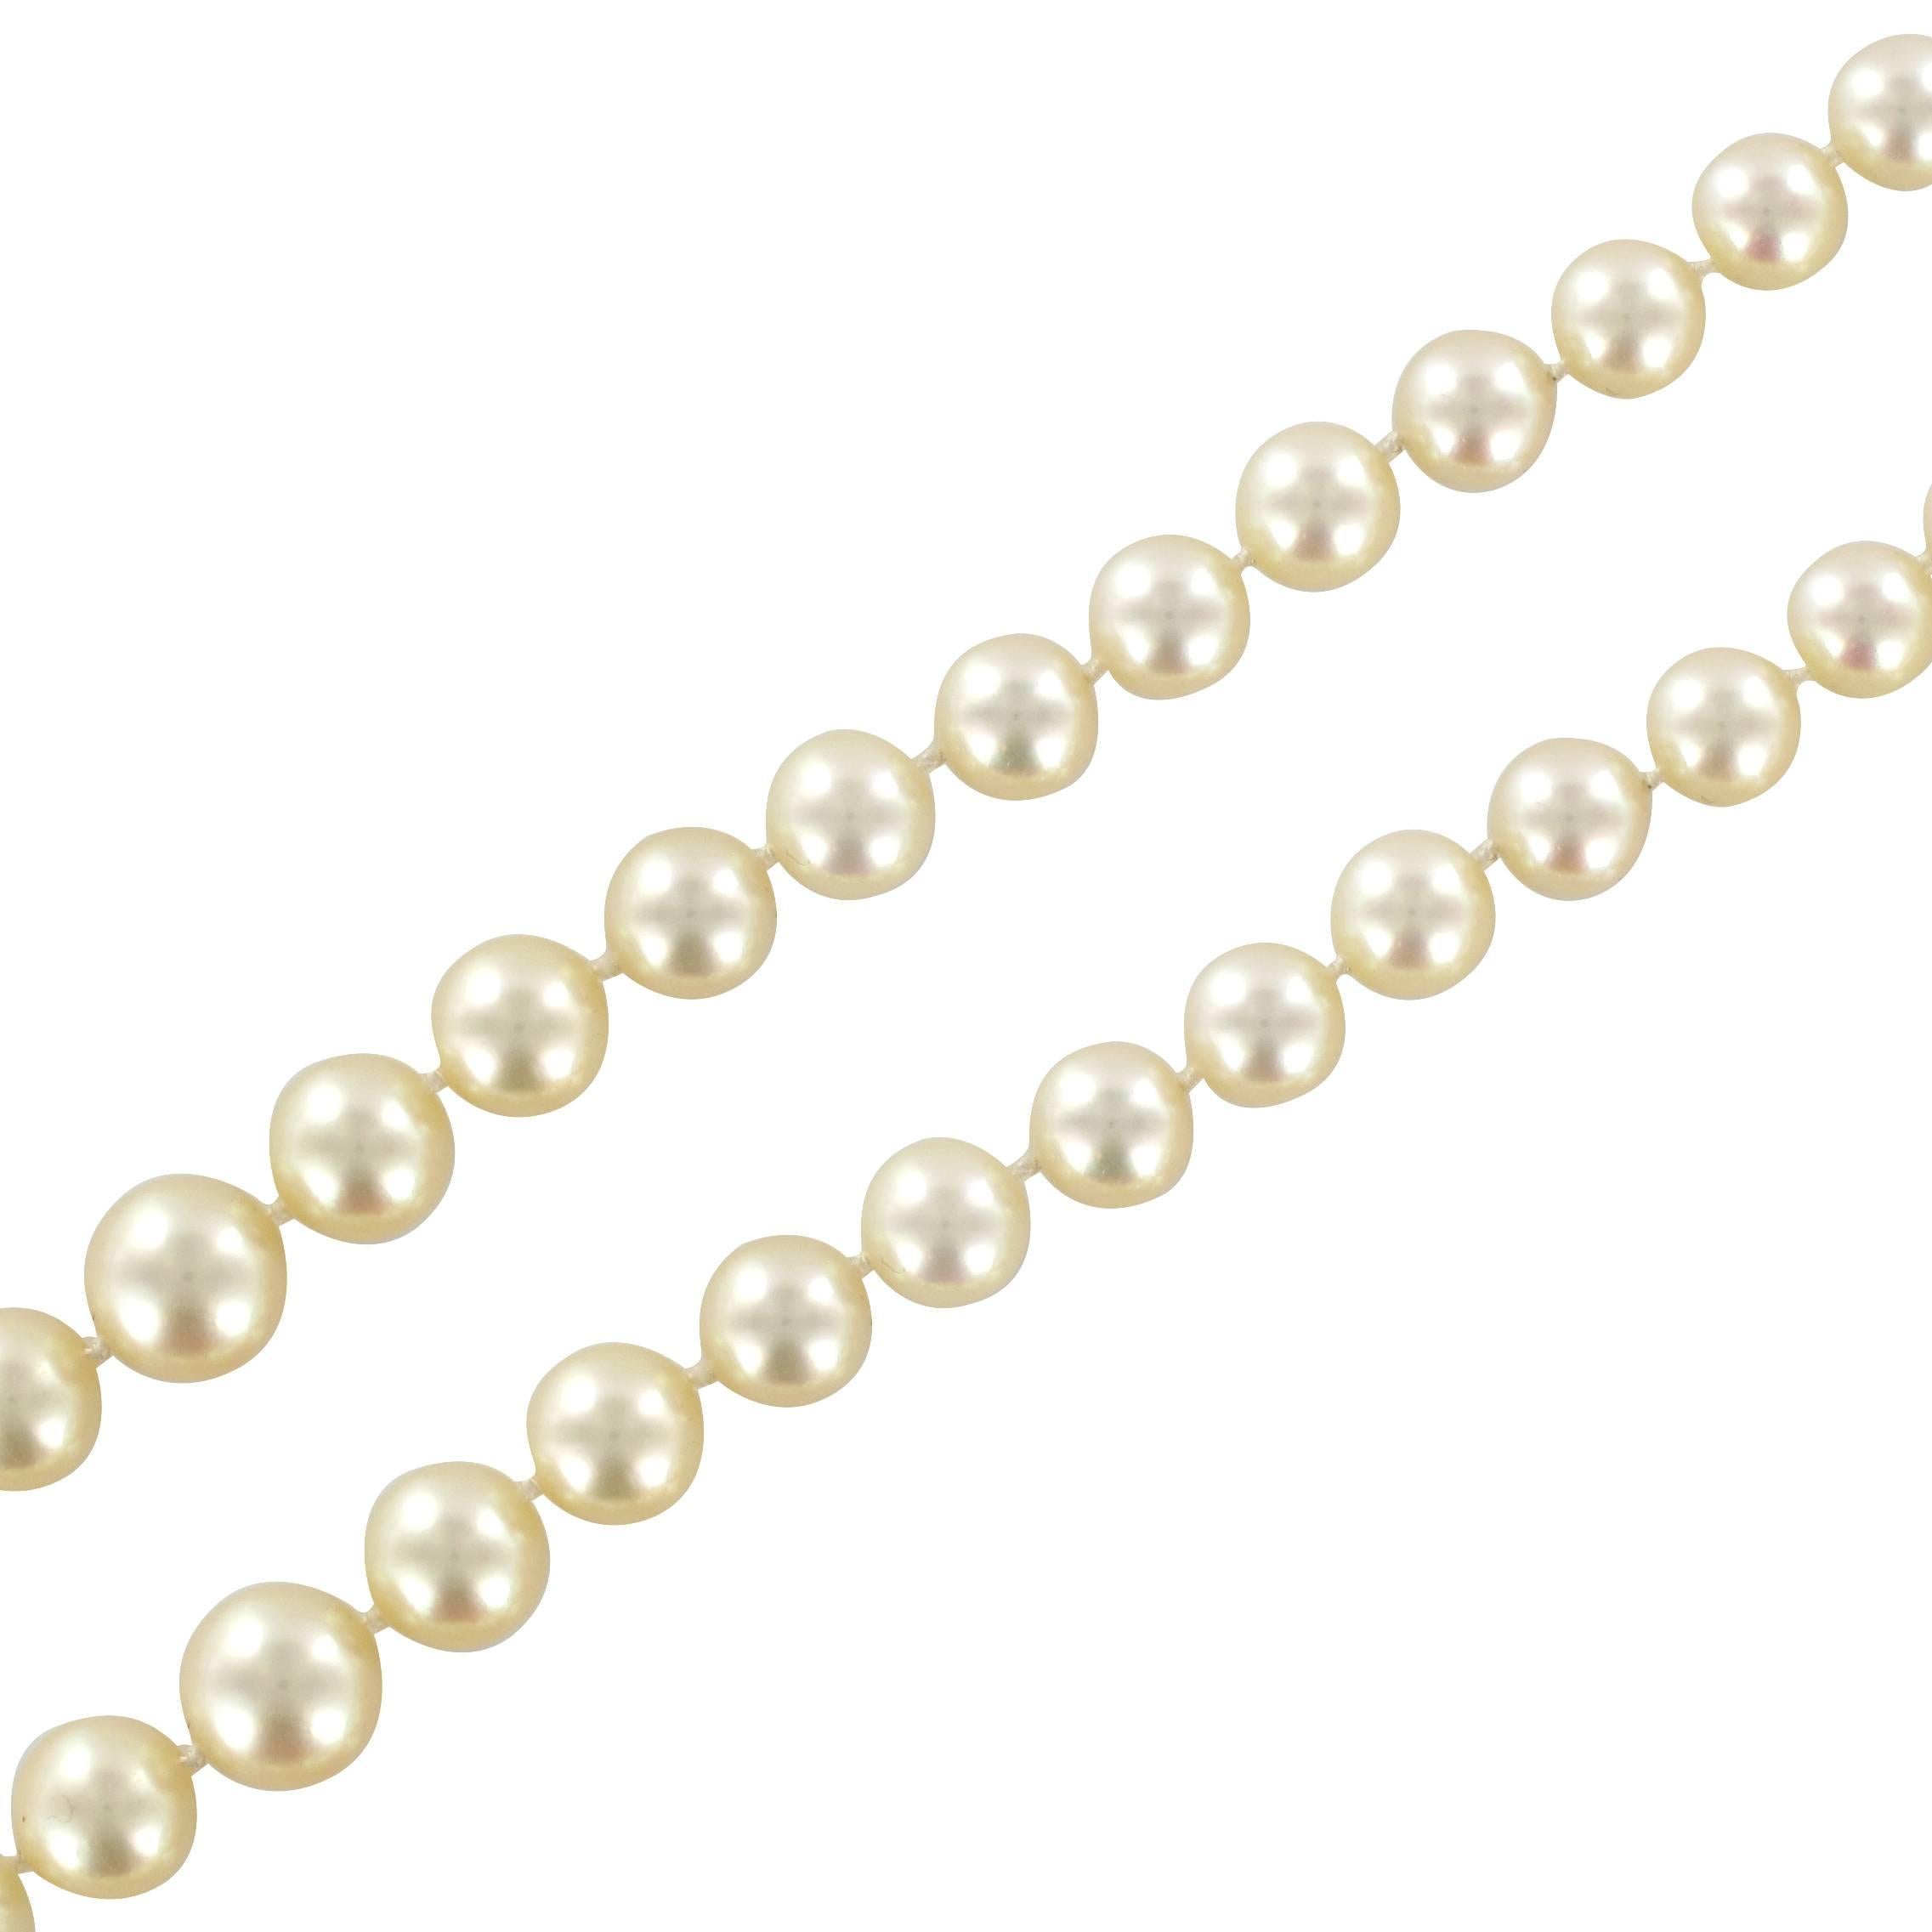 Antique pearl necklace composed of two strands of Japanese cultured pearls. The double row of pearls is fastened by a round double clip clasp of 18 carat white gold, eagle head hallmark. This is set with a round cultured pearl surrounded by 5 round